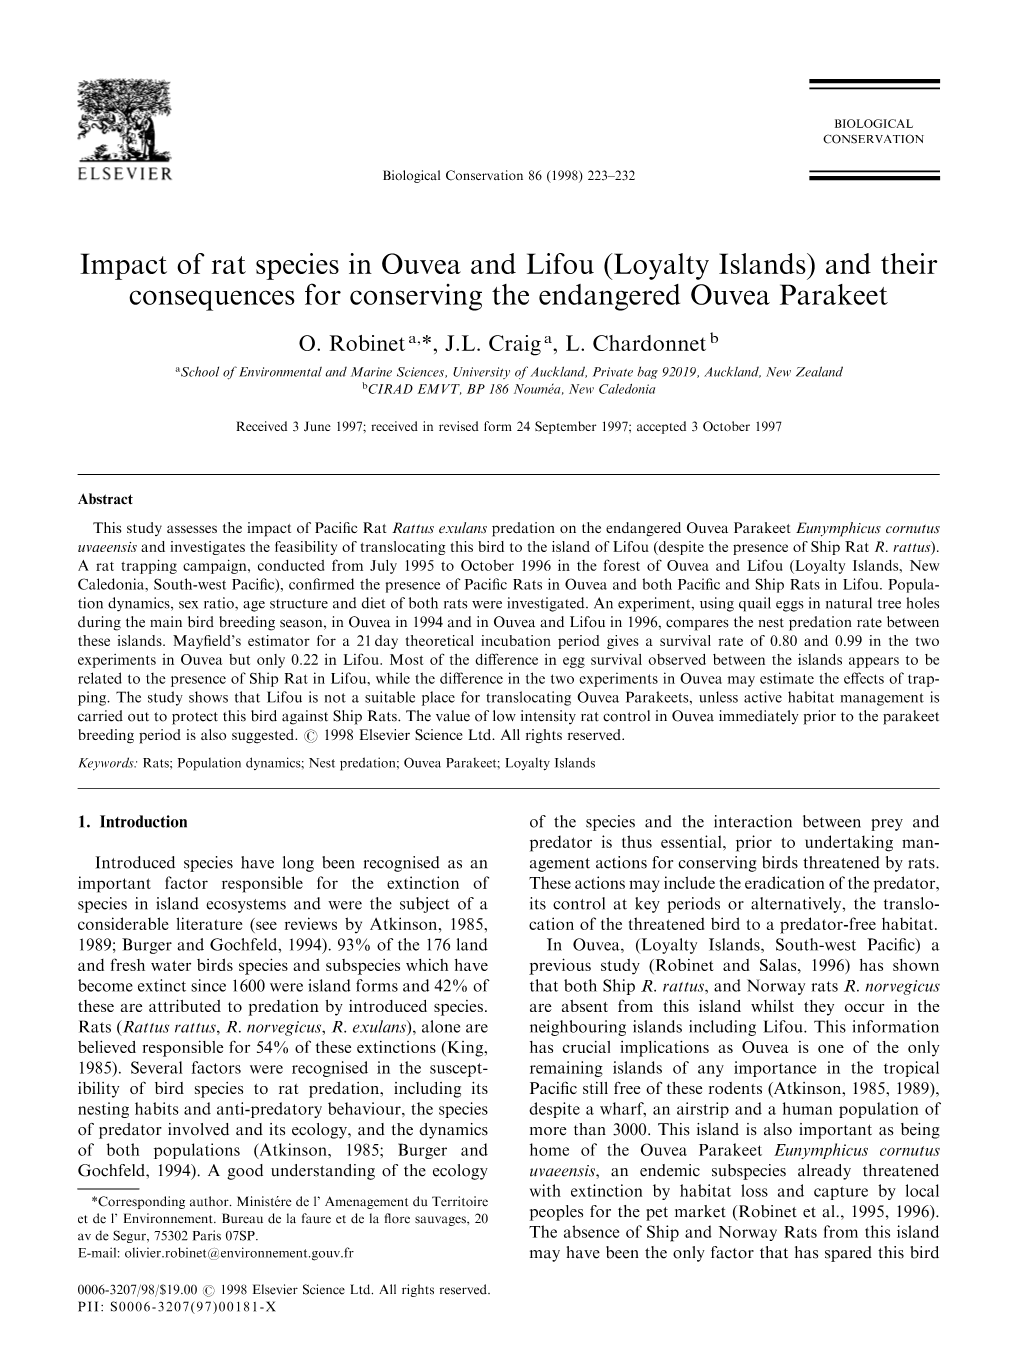 Impact of Rat Species in Ouvea and Lifou (Loyalty Islands) and Their Consequences for Conserving the Endangered Ouvea Parakeet